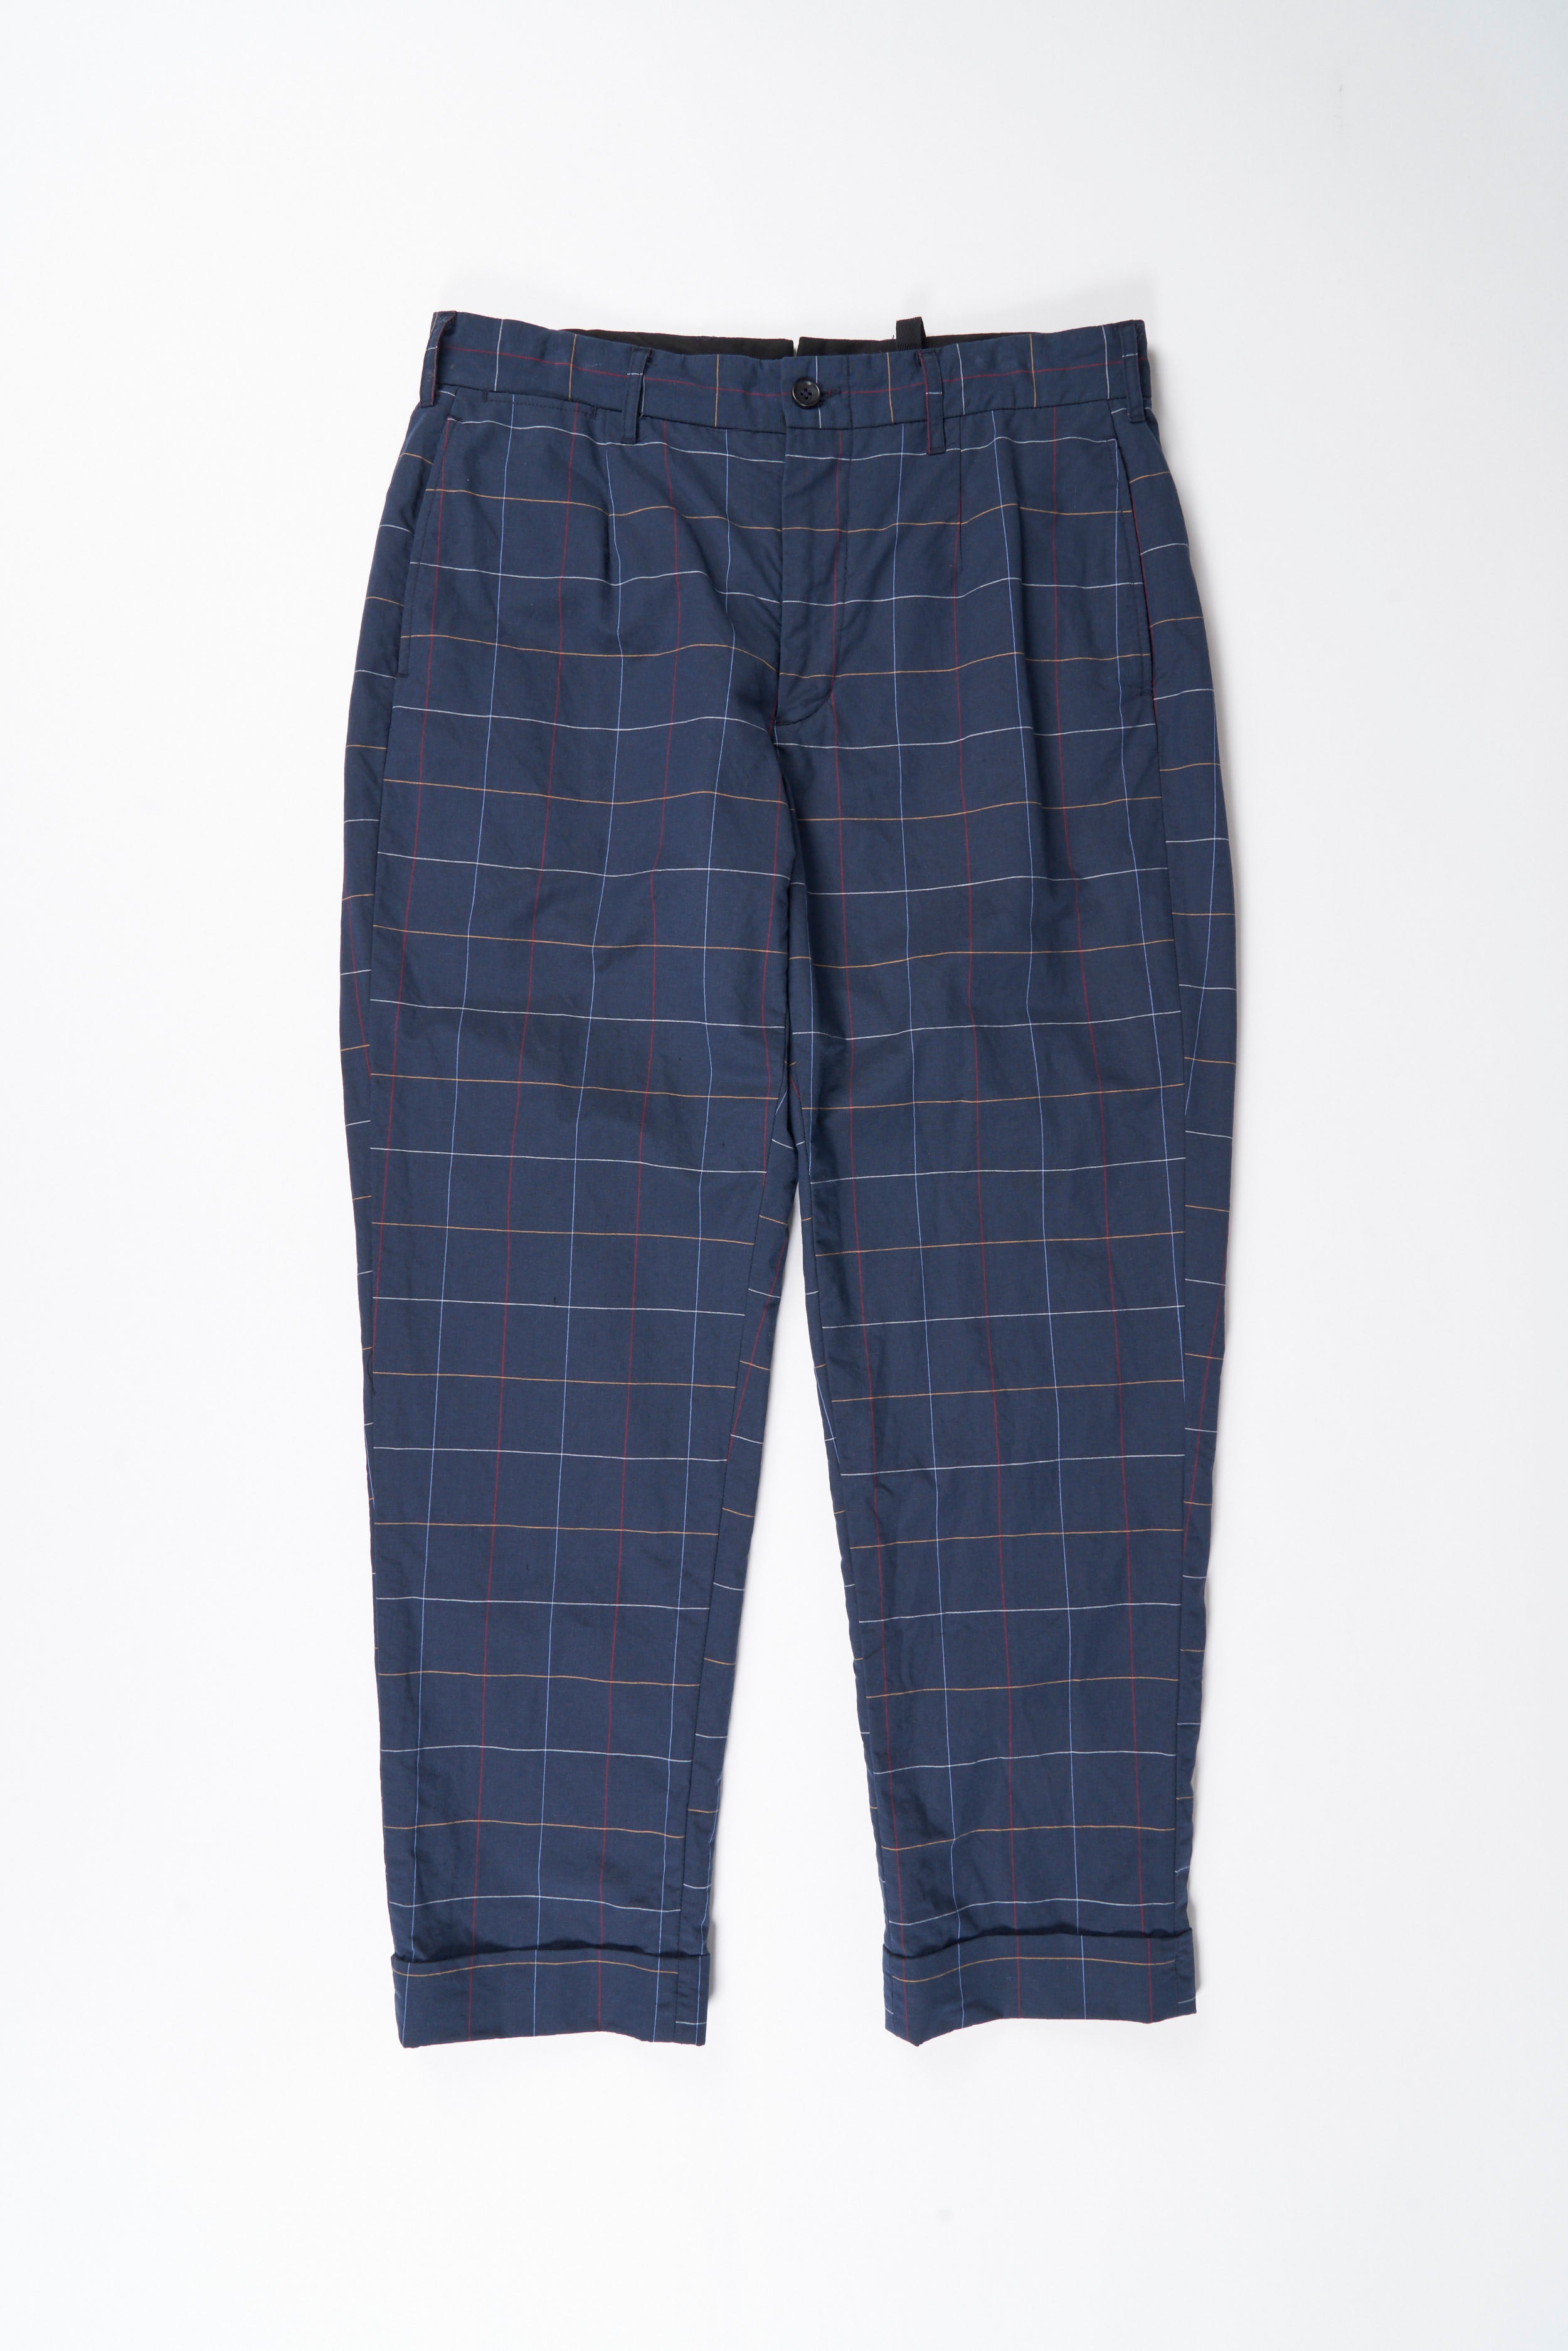 Andover Pant - Navy CL Windowpane